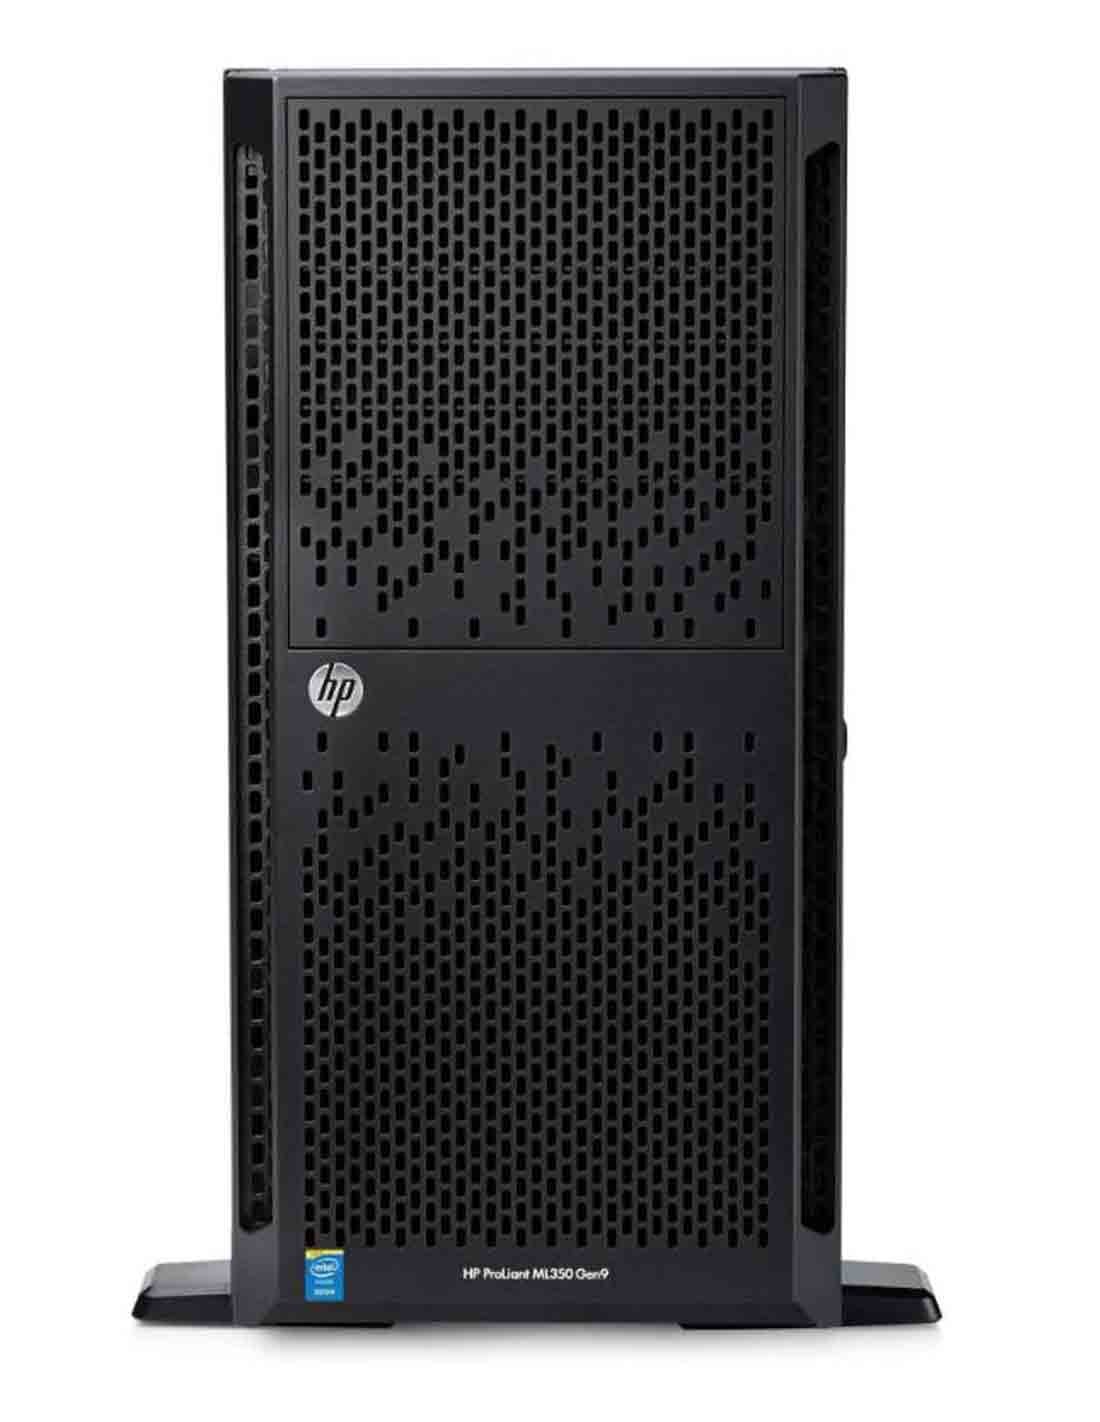 HP ProLiant ML350 Gen9 E5-2620V3 Tower Server which has has high performance